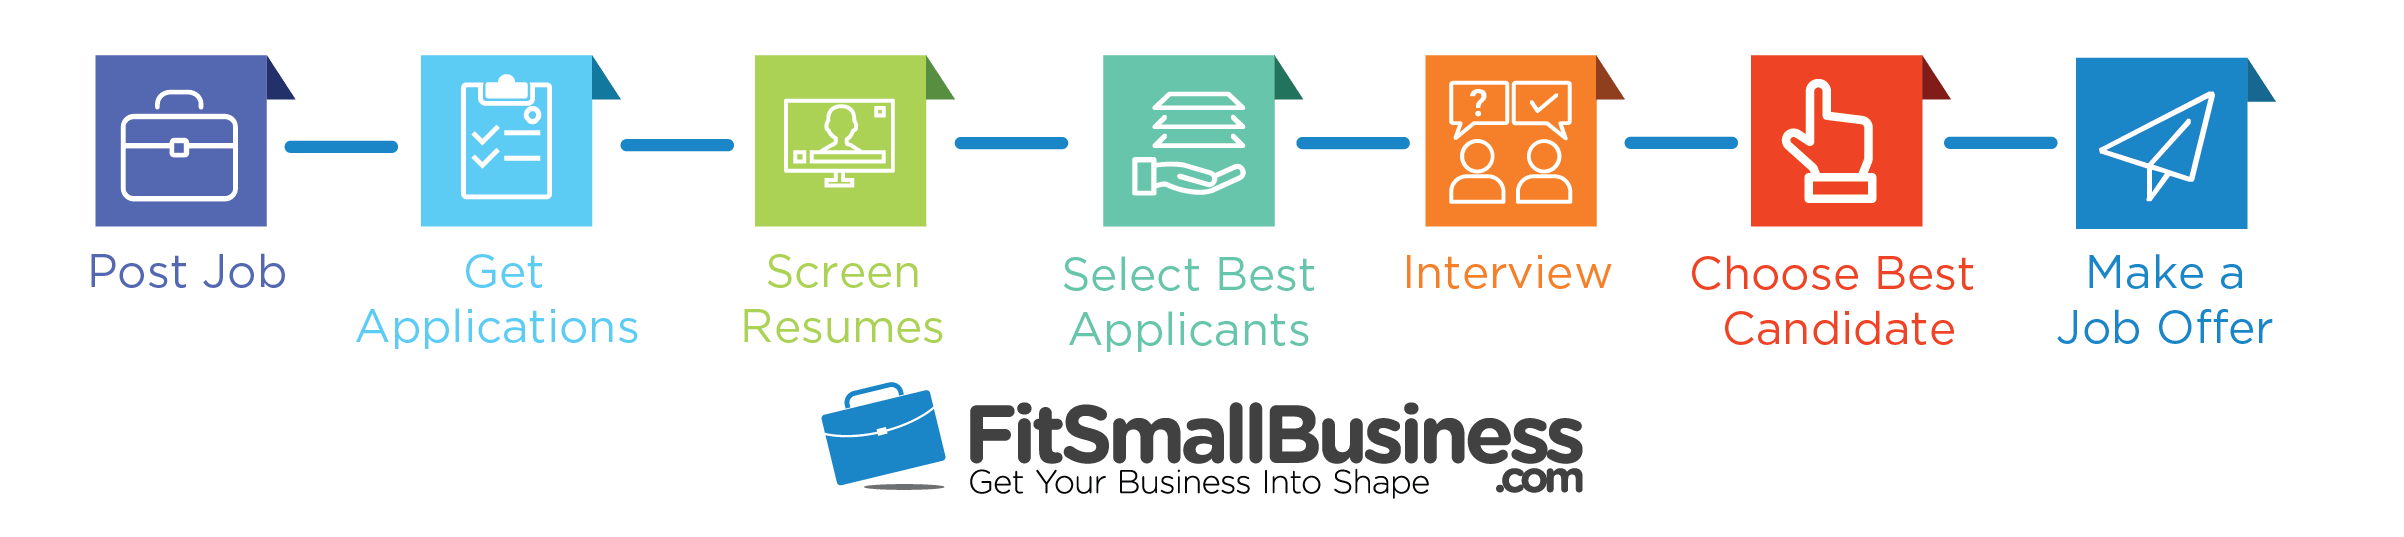 Resume Screening Fit Small Business Hiring Process Flow